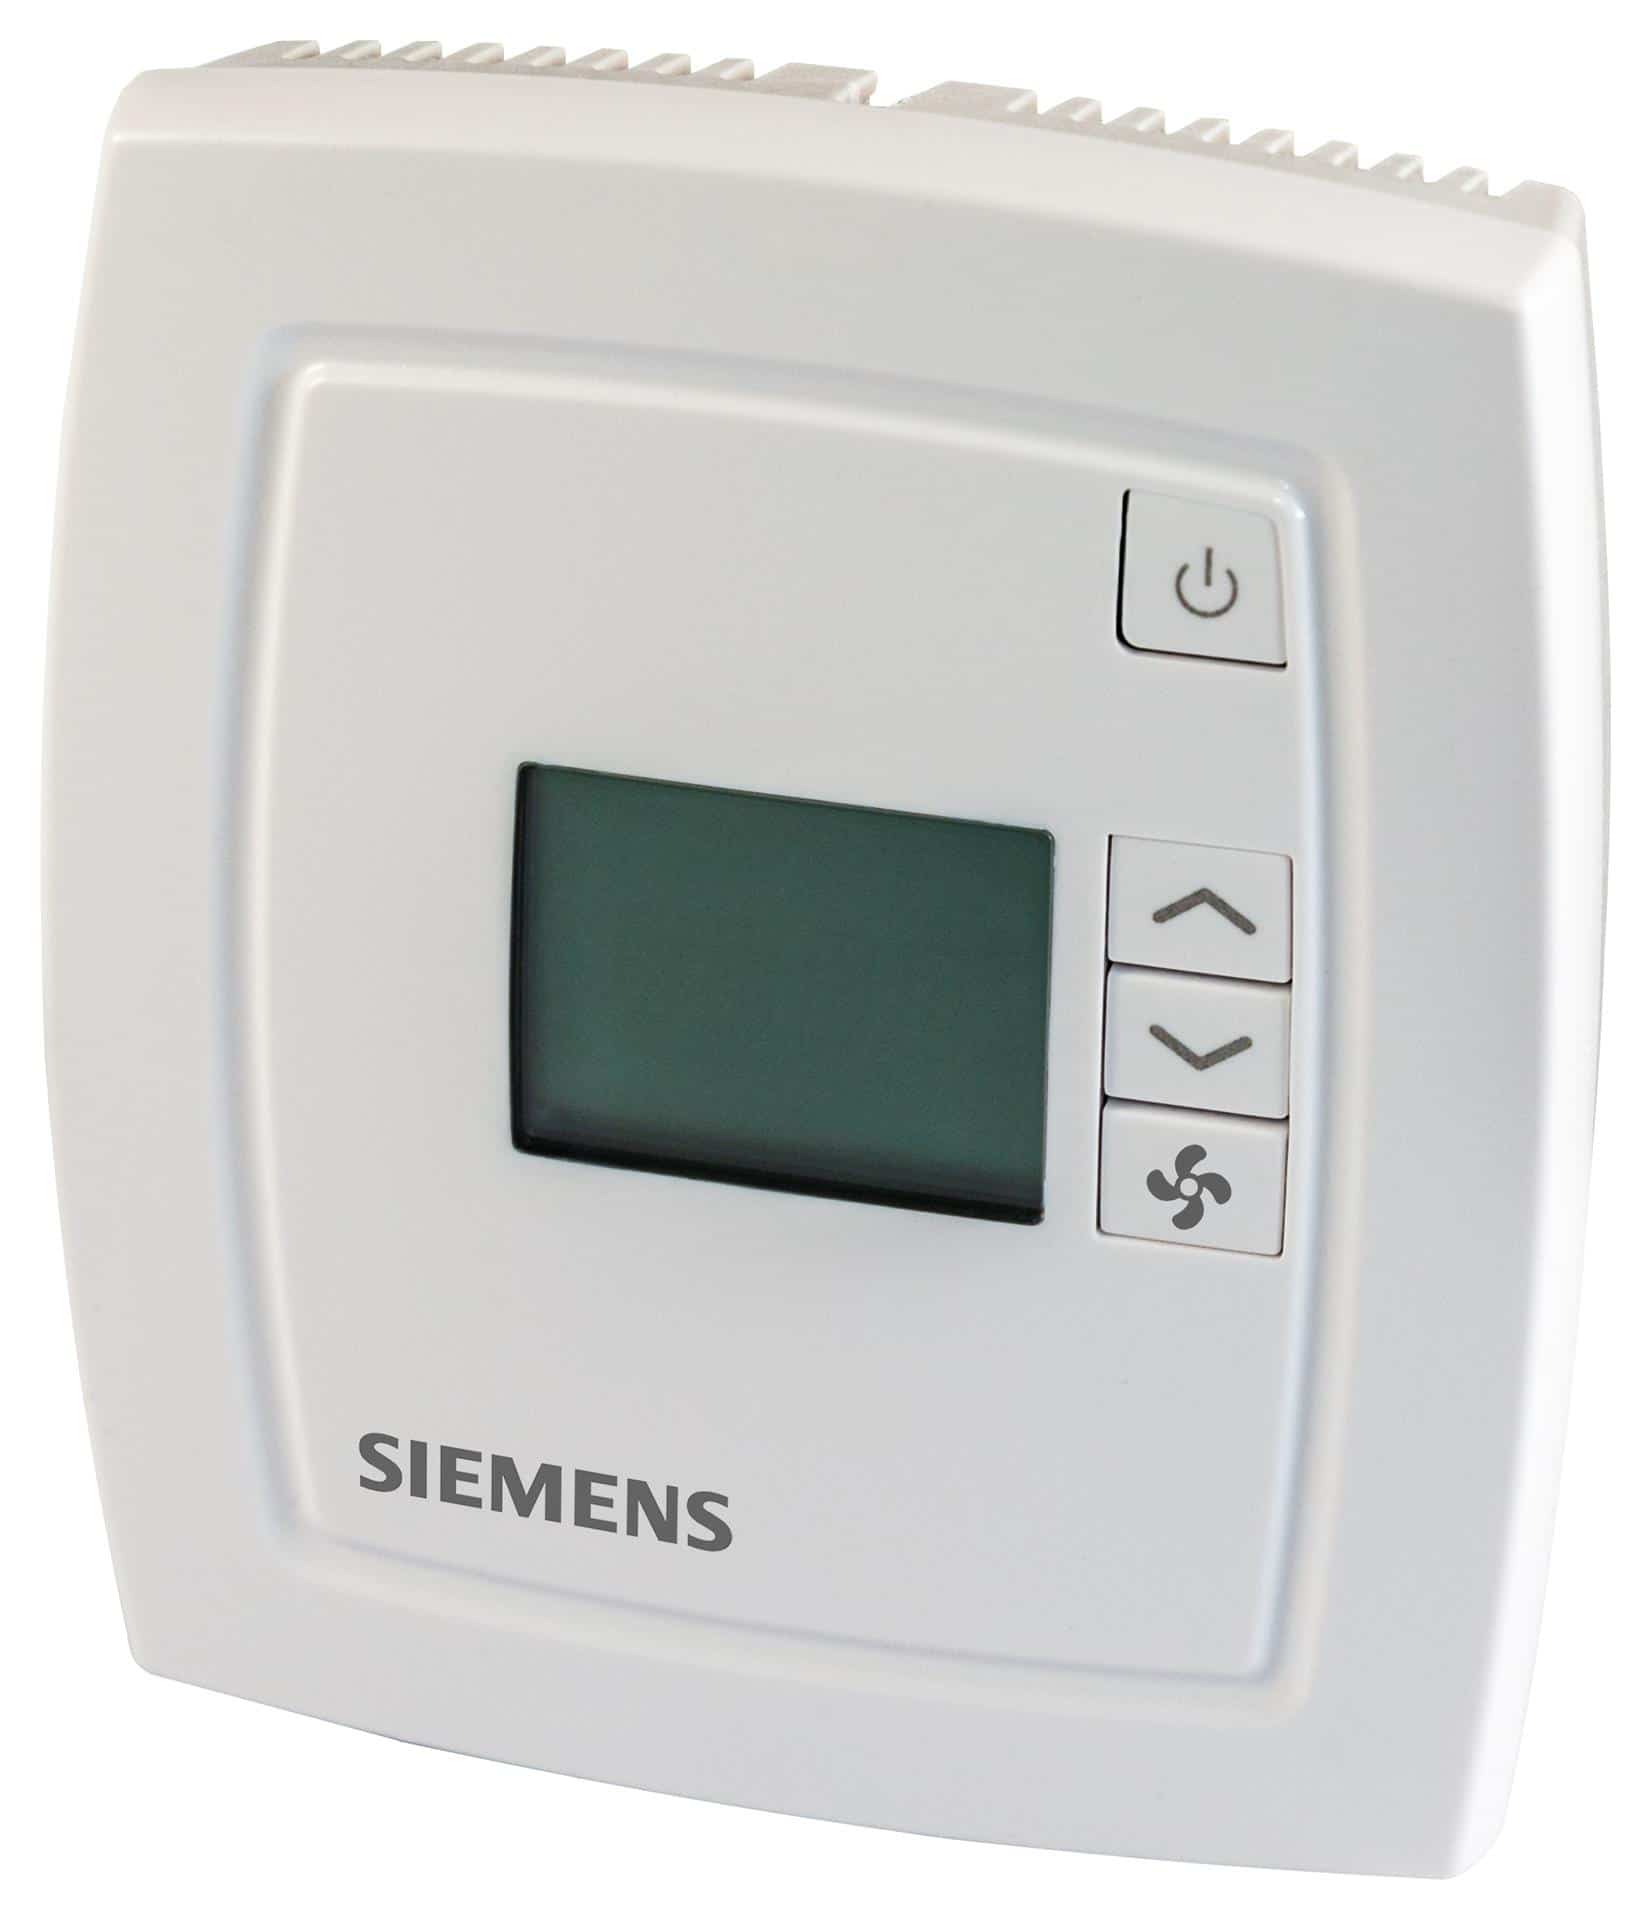 RDB160BN – FCU/Universal App. Room Thermostat with BACnet MS/TP Communication